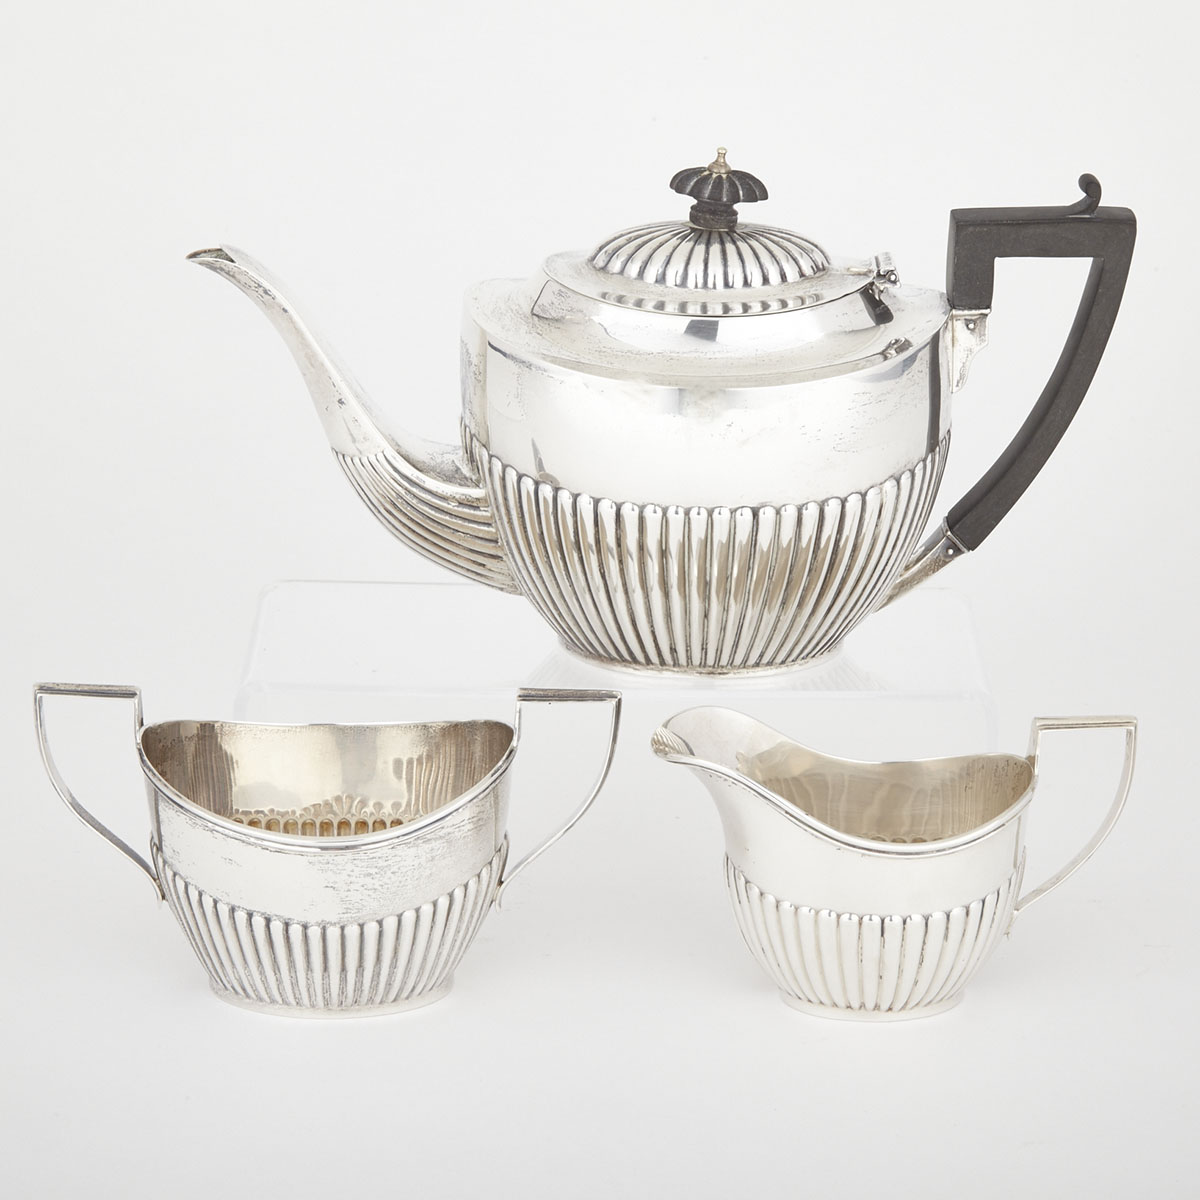 Canadian Silver Tea Service, Henry Birks & Sons, Montreal, Que., early 20th century